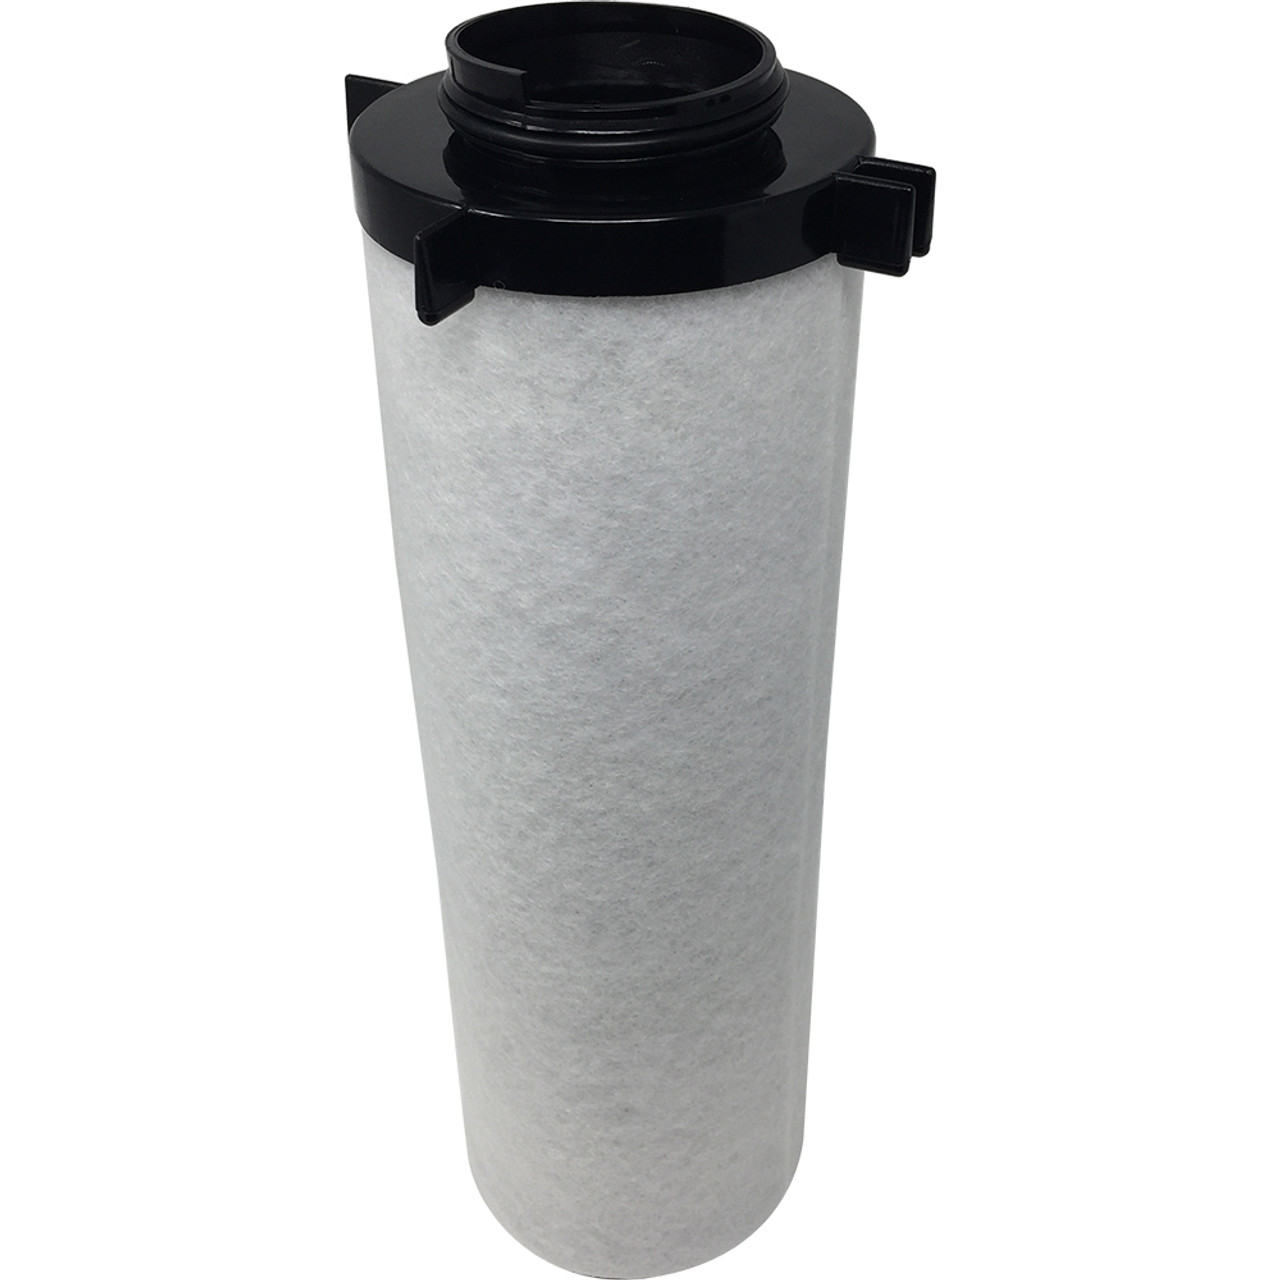 OEM Equivalent Ingersoll Rand 85565828 Replacement Filter Element 